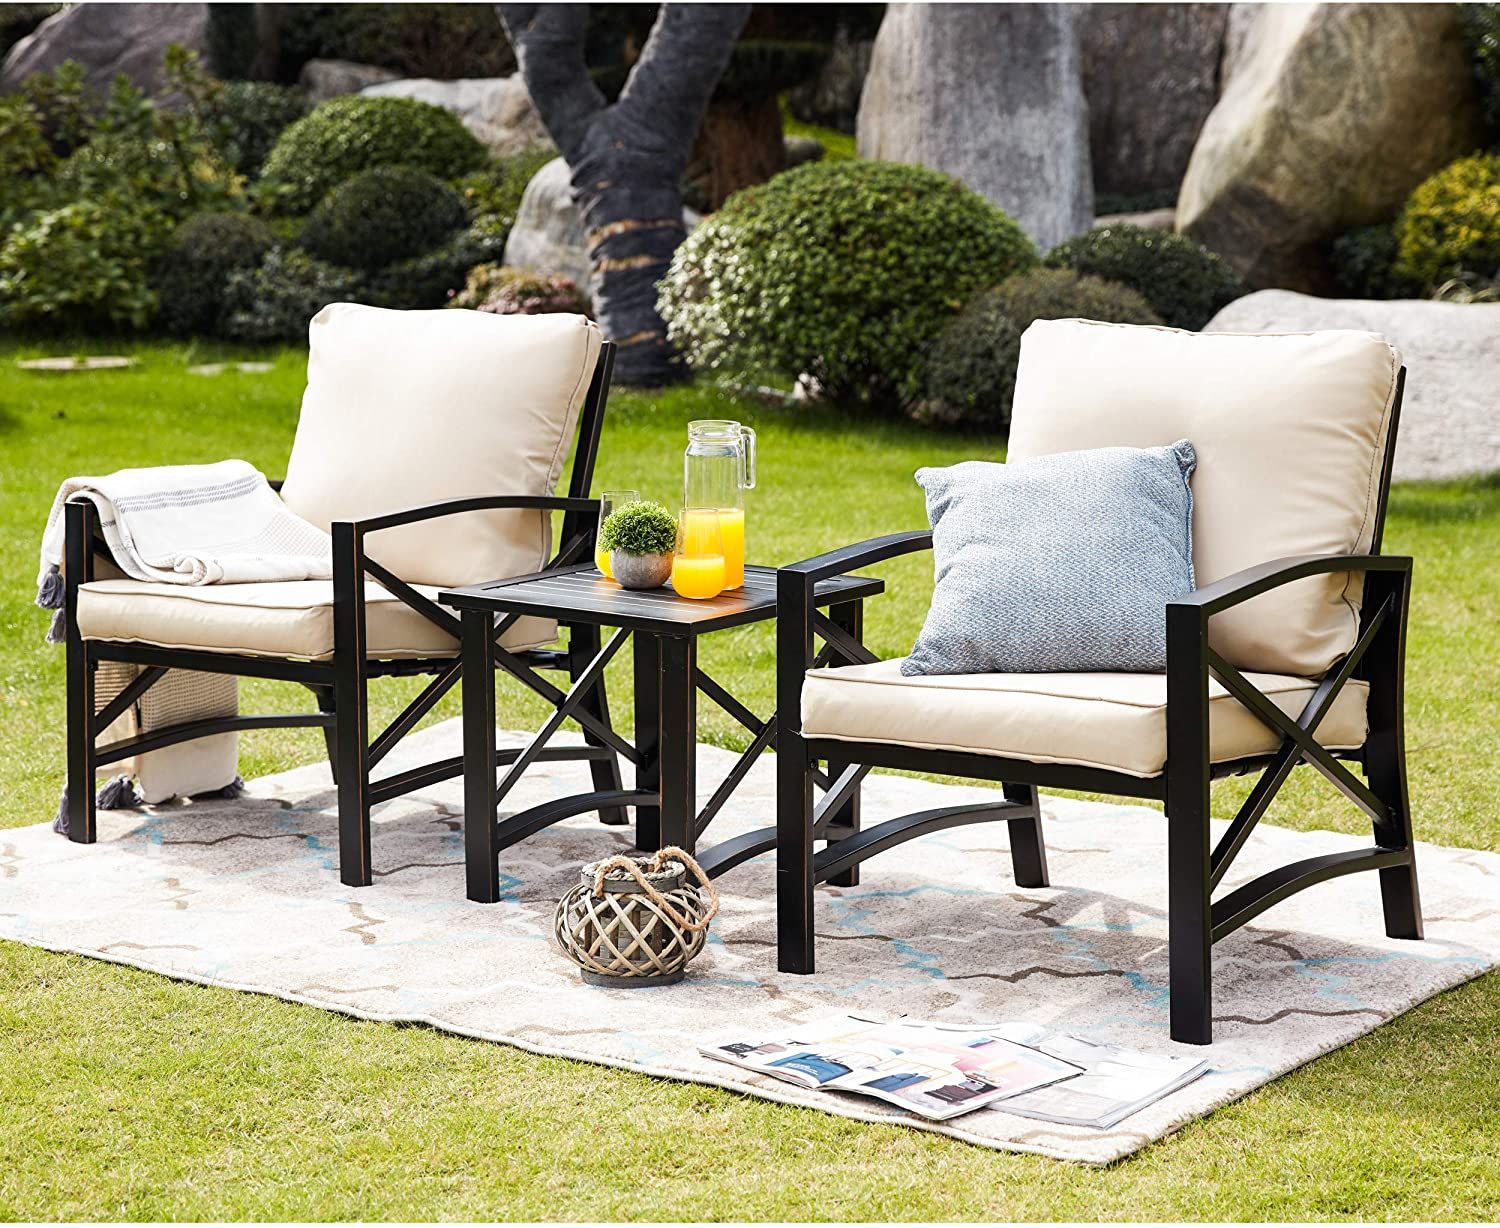 8 Best Patio Furniture Sets 2021 The, Outdoor Furniture Set